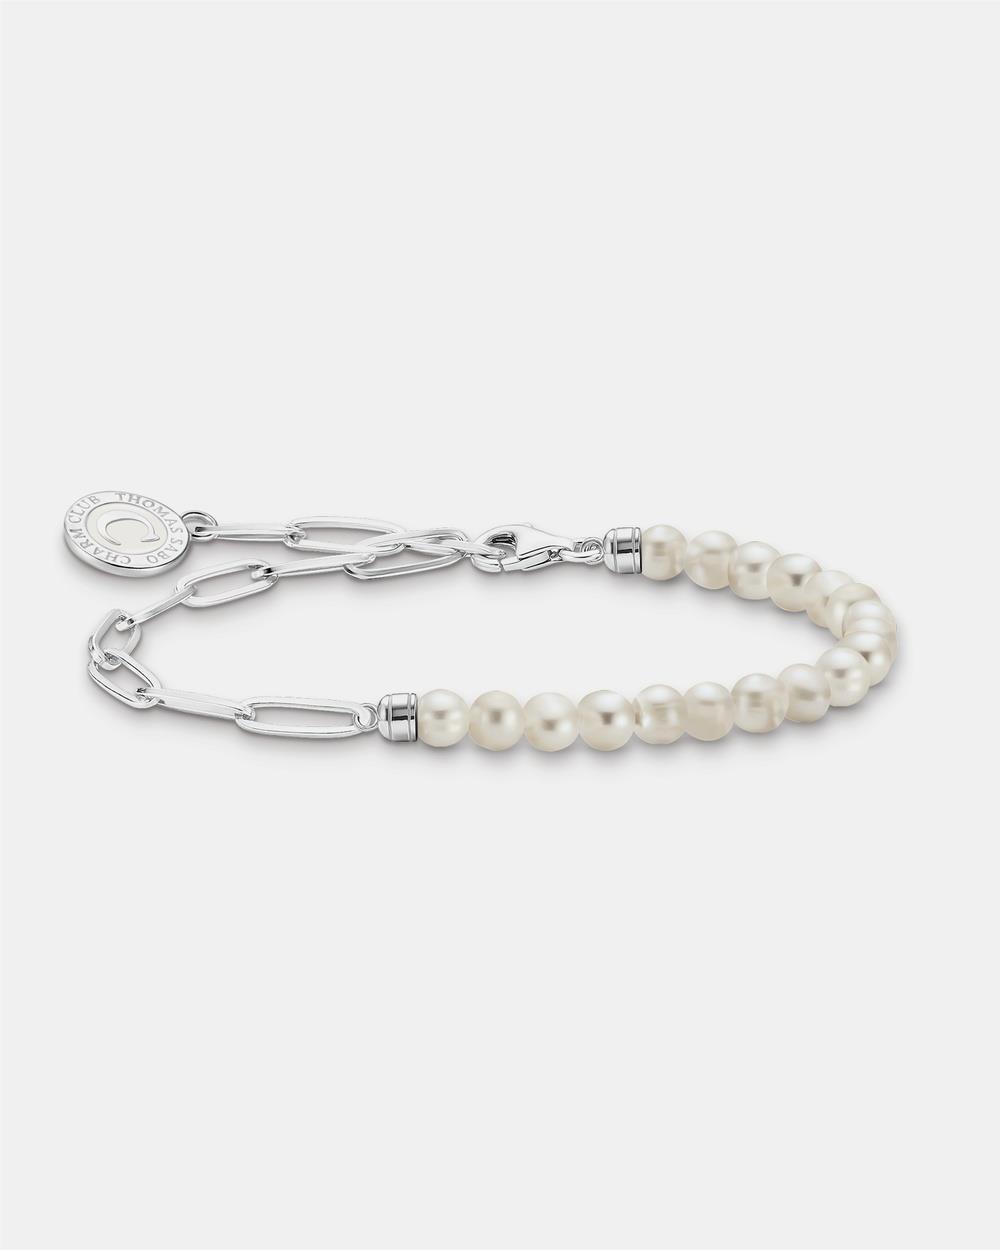 THOMAS SABO - Charm Bracelet with Pearls and Chain Links Silver - Jewellery (Silver) Charm Bracelet with Pearls and Chain Links Silver